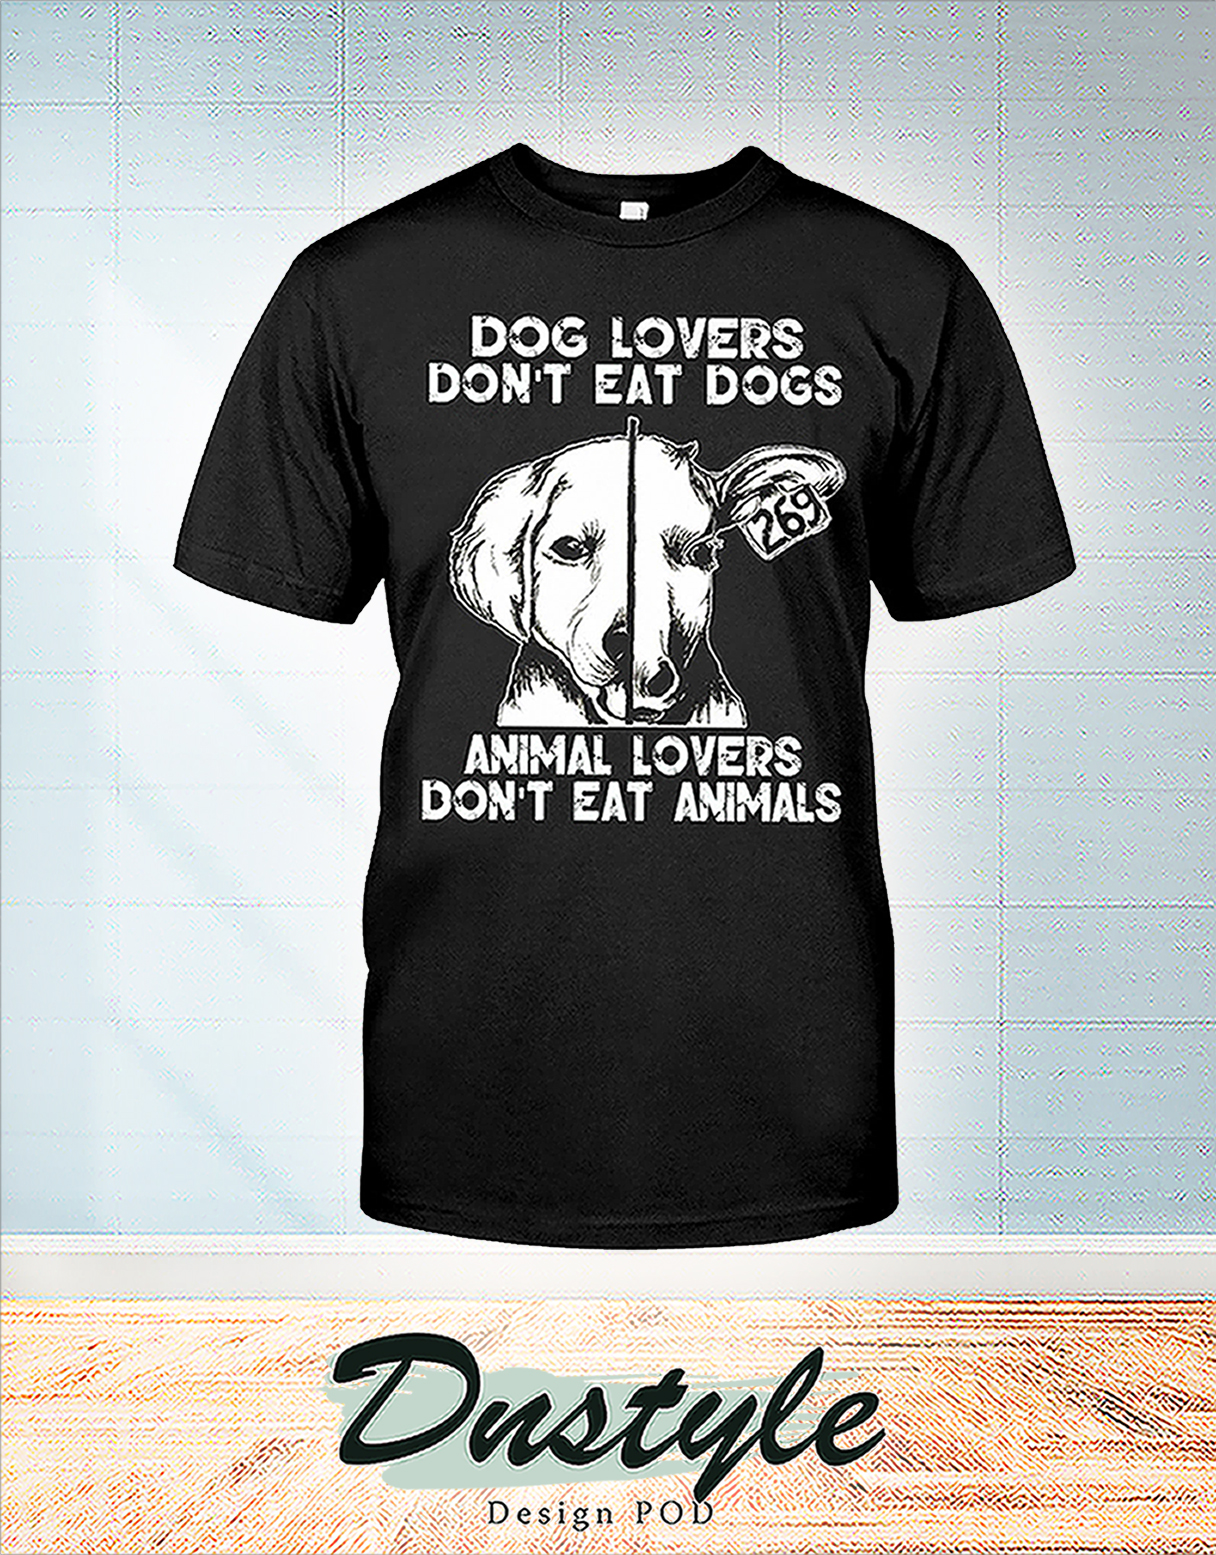 Dog lovers don't eat dogs animal lovers don't eat animals shirt